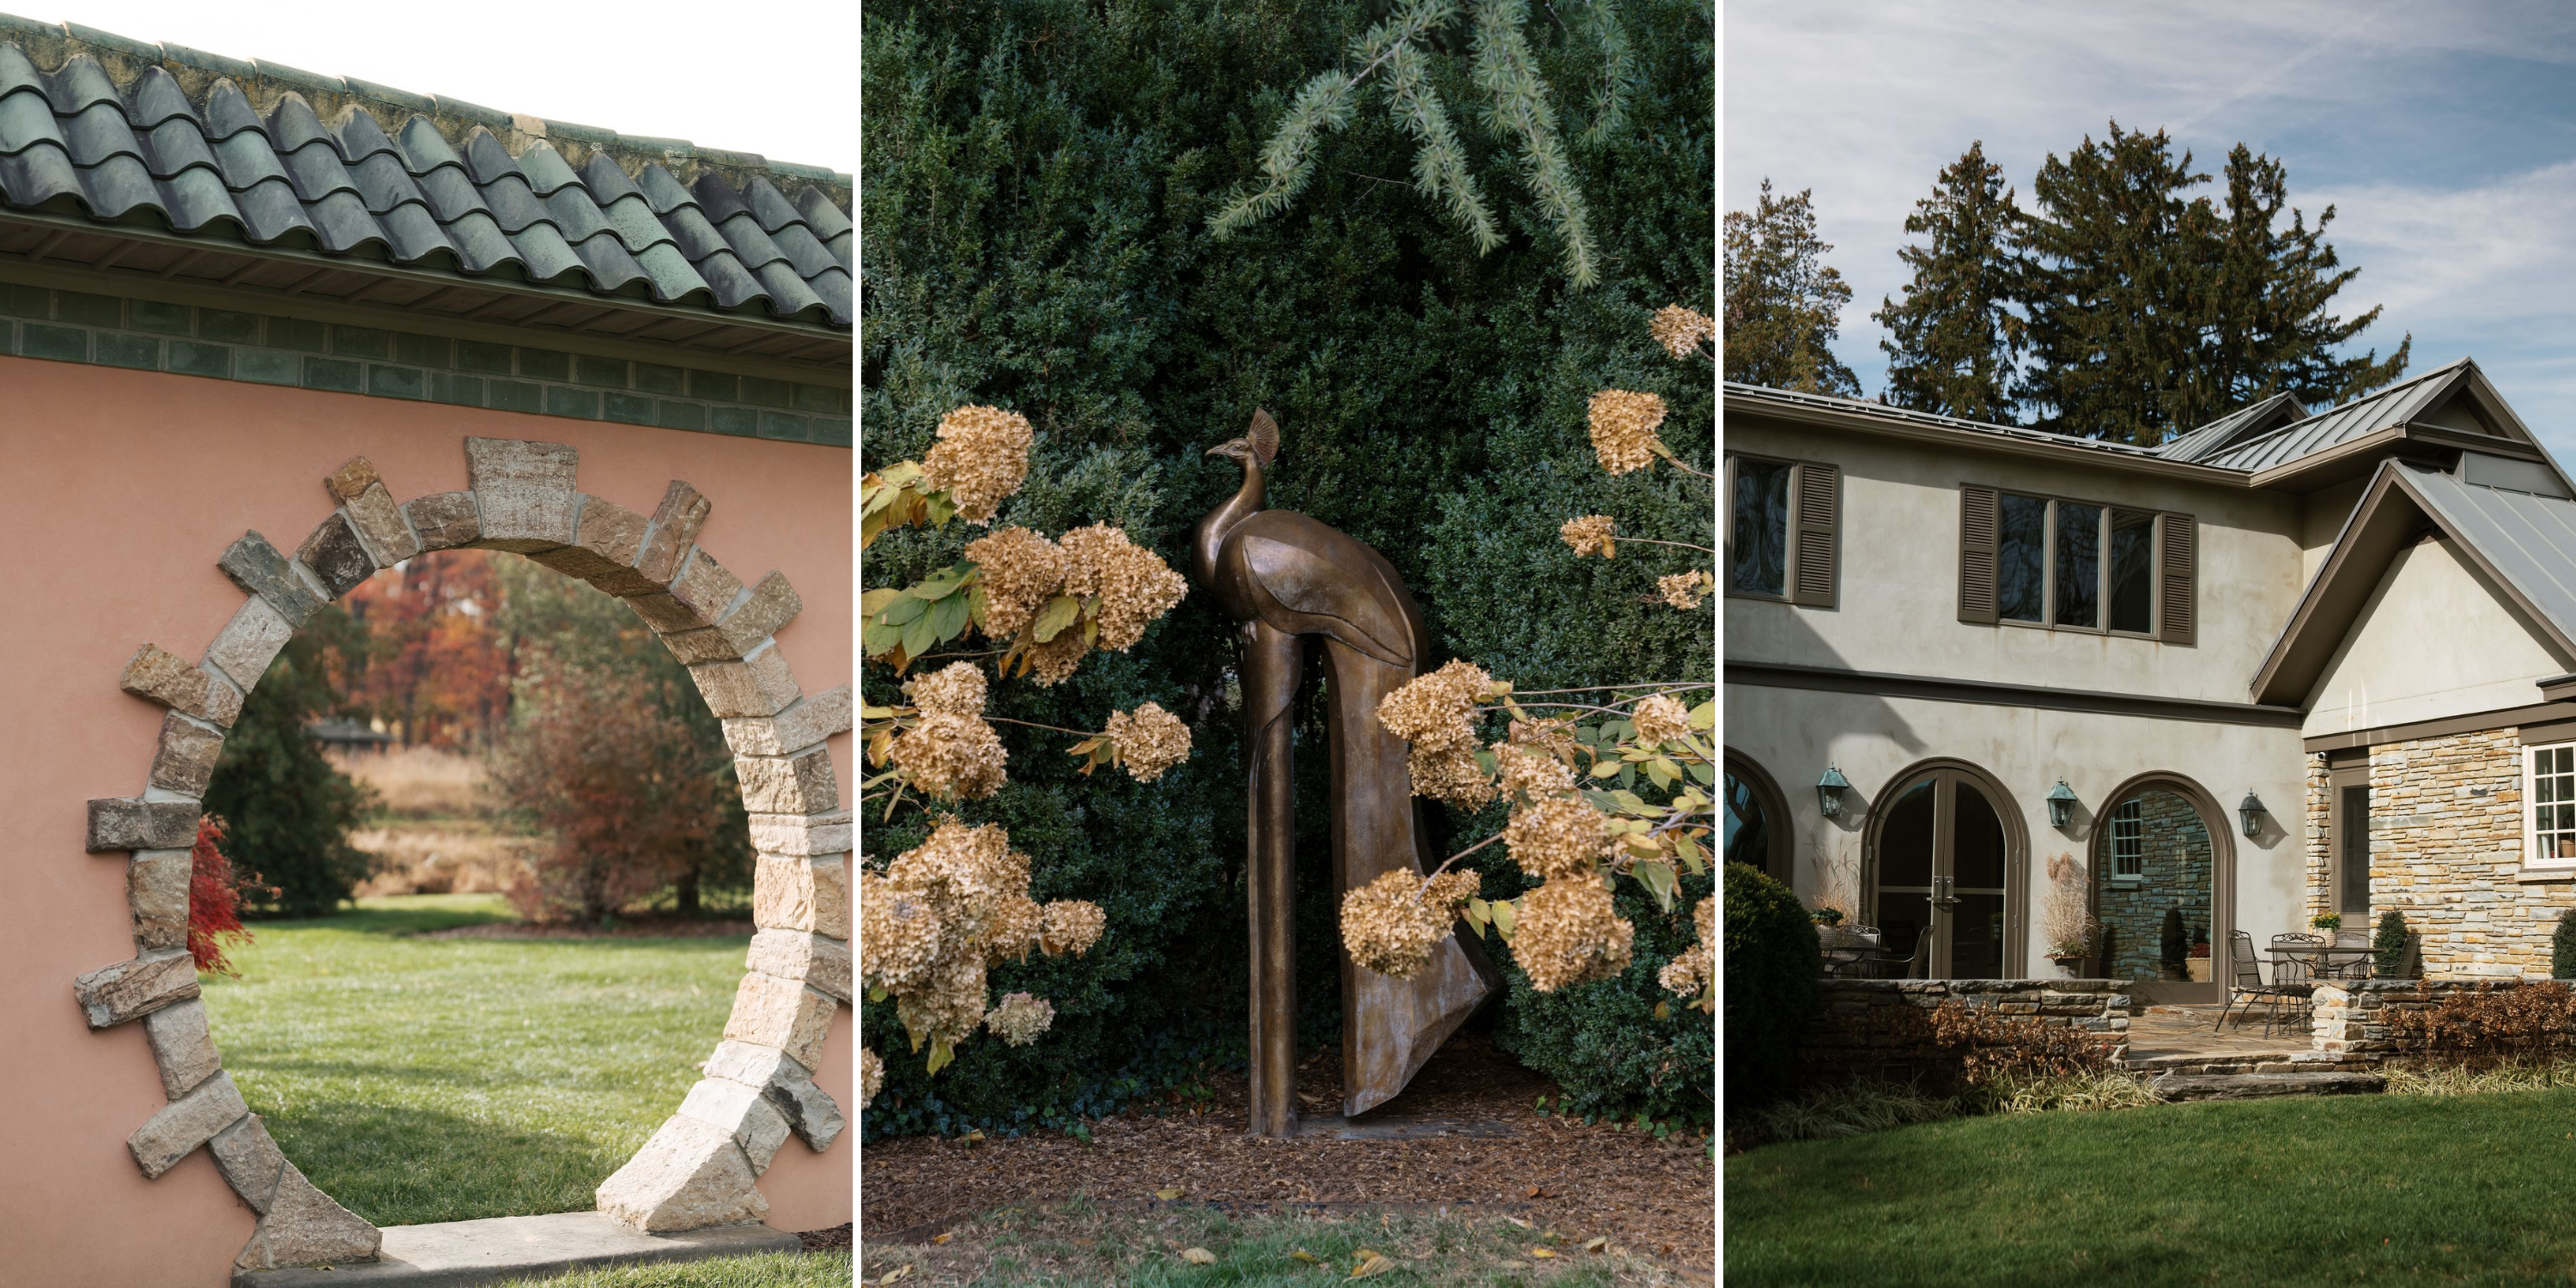 A collage of three images: A circular moon gate in a wall; a peacock sculpture in a garden; a stately house